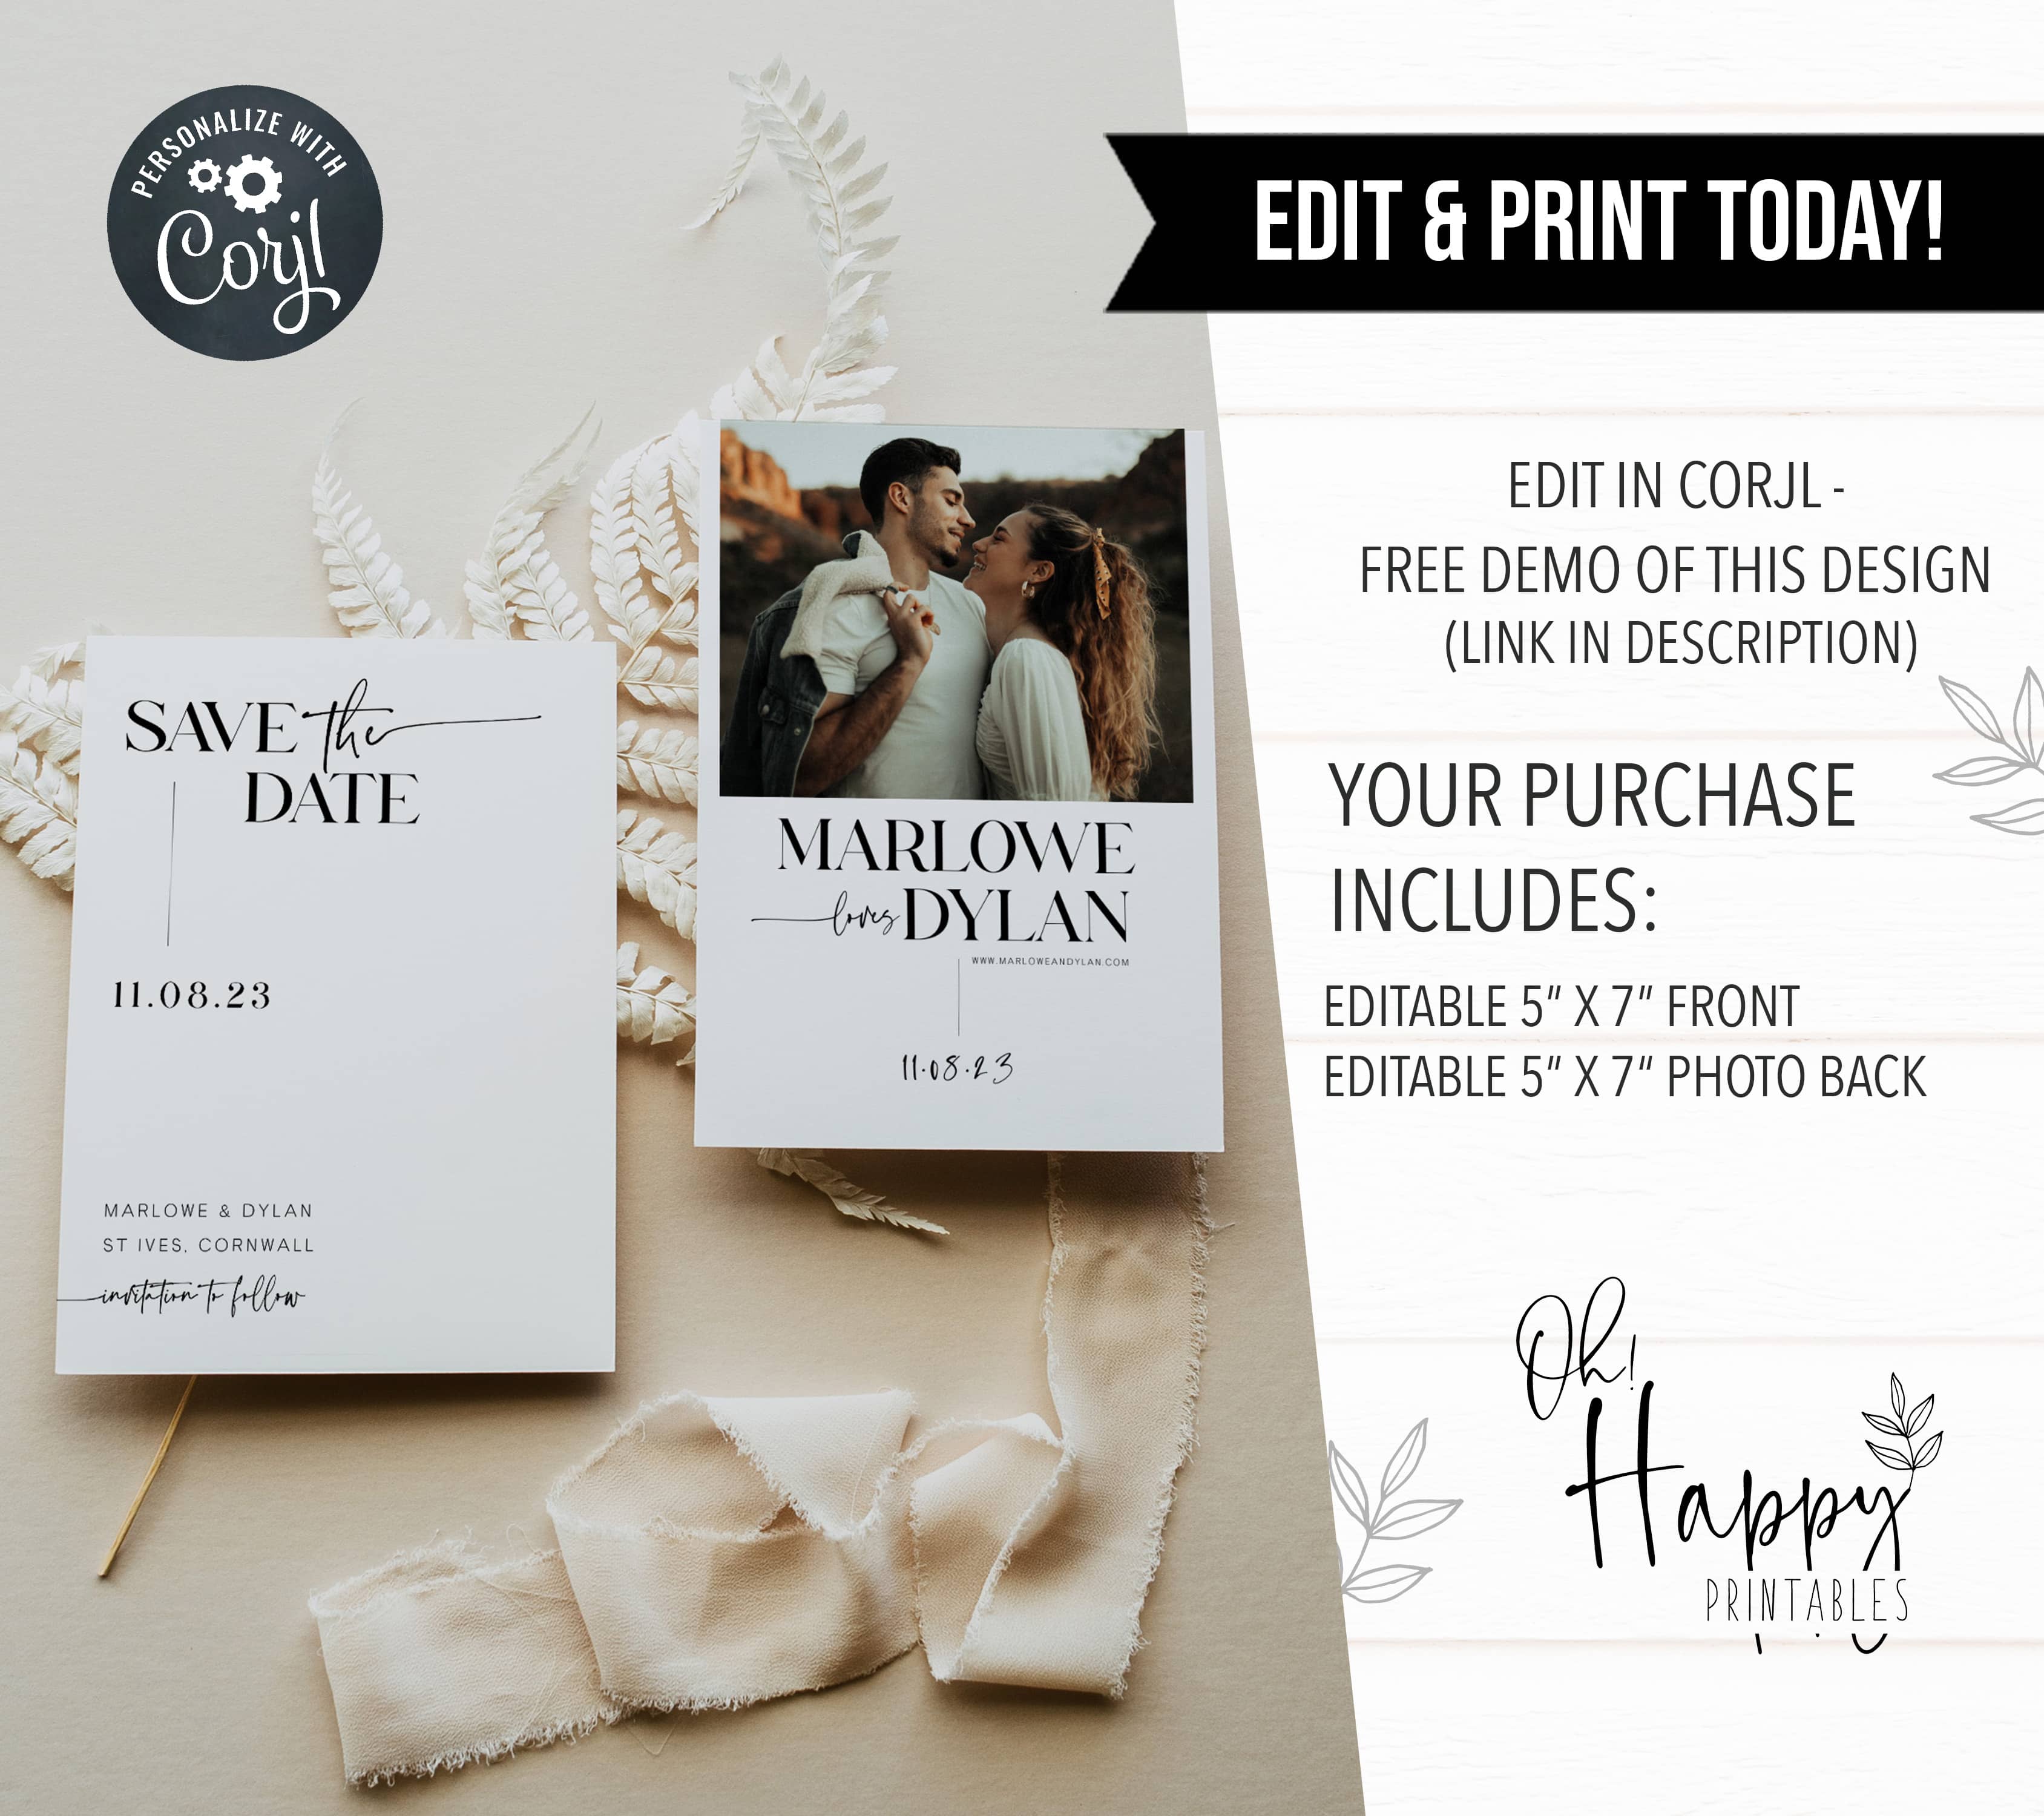 Modern Save the Date Cards